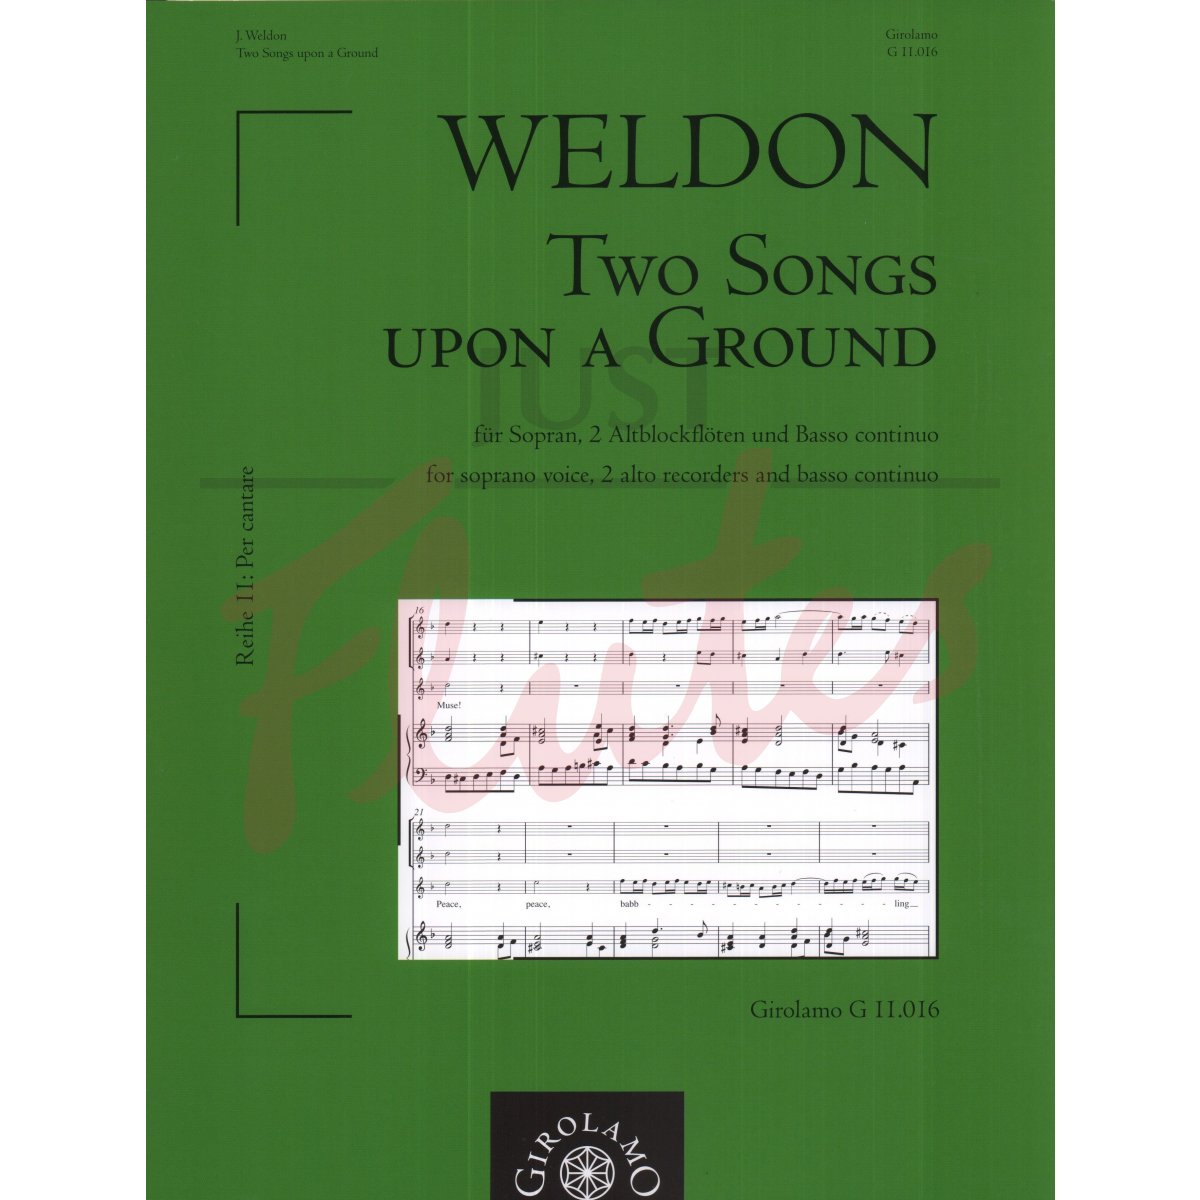 Two Songs Upon a Ground for Soprano Voice, Two Flutes/Treble Recorders and Basso Continuo